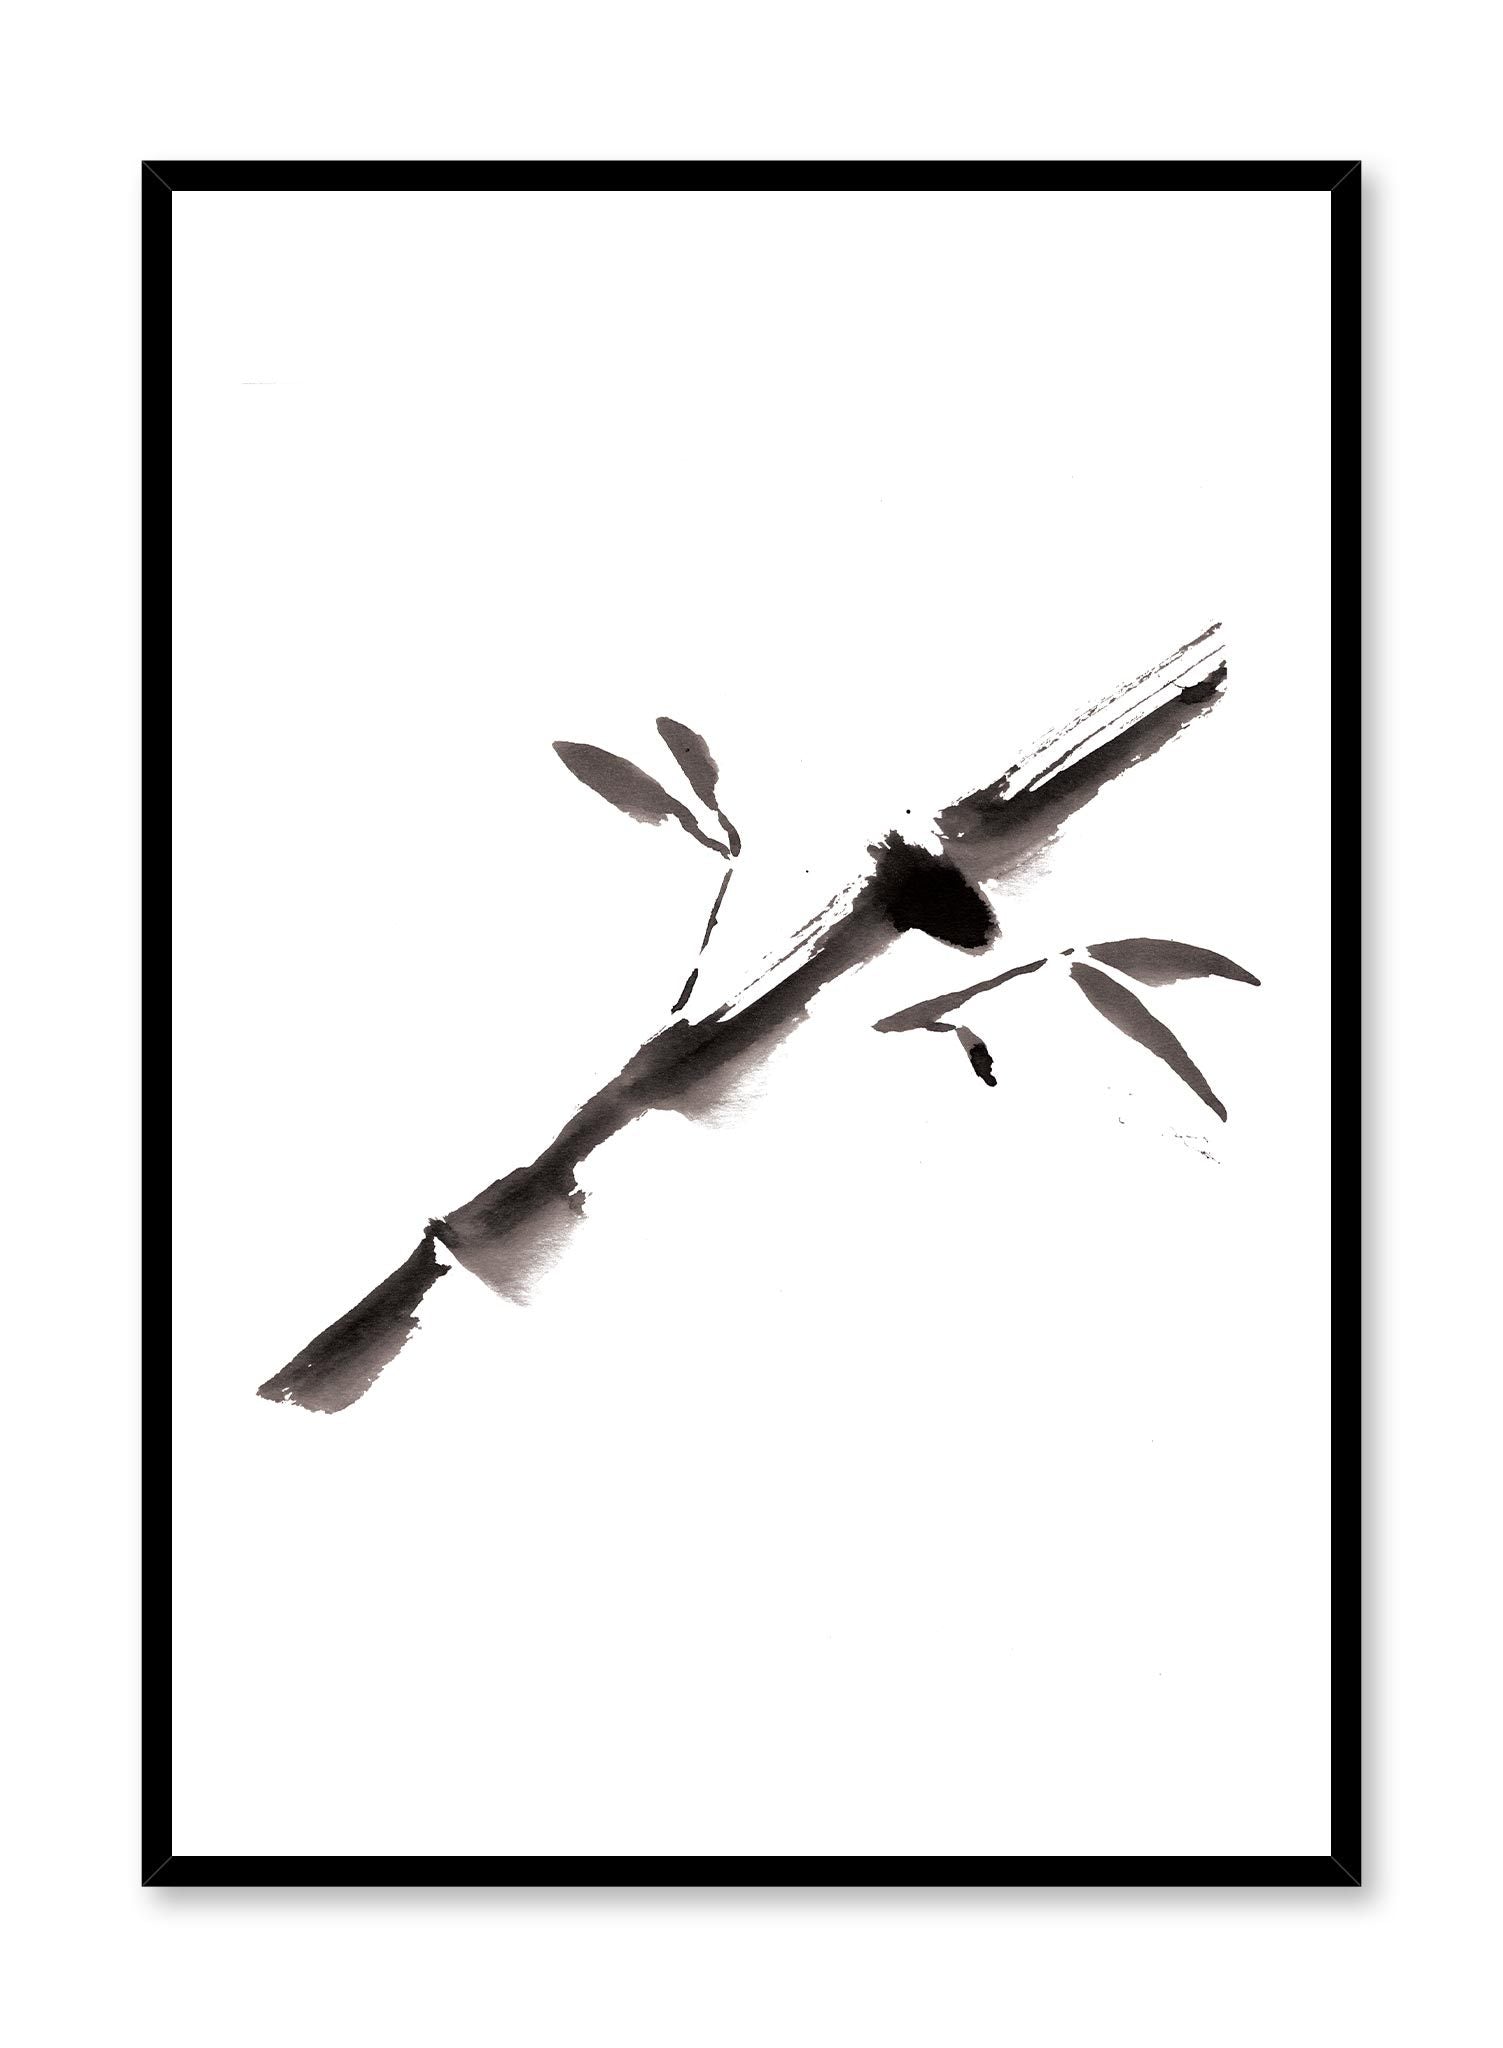 Bamboo is a minimalist illustration by Opposite Wall of an inked black and white bamboo branch.